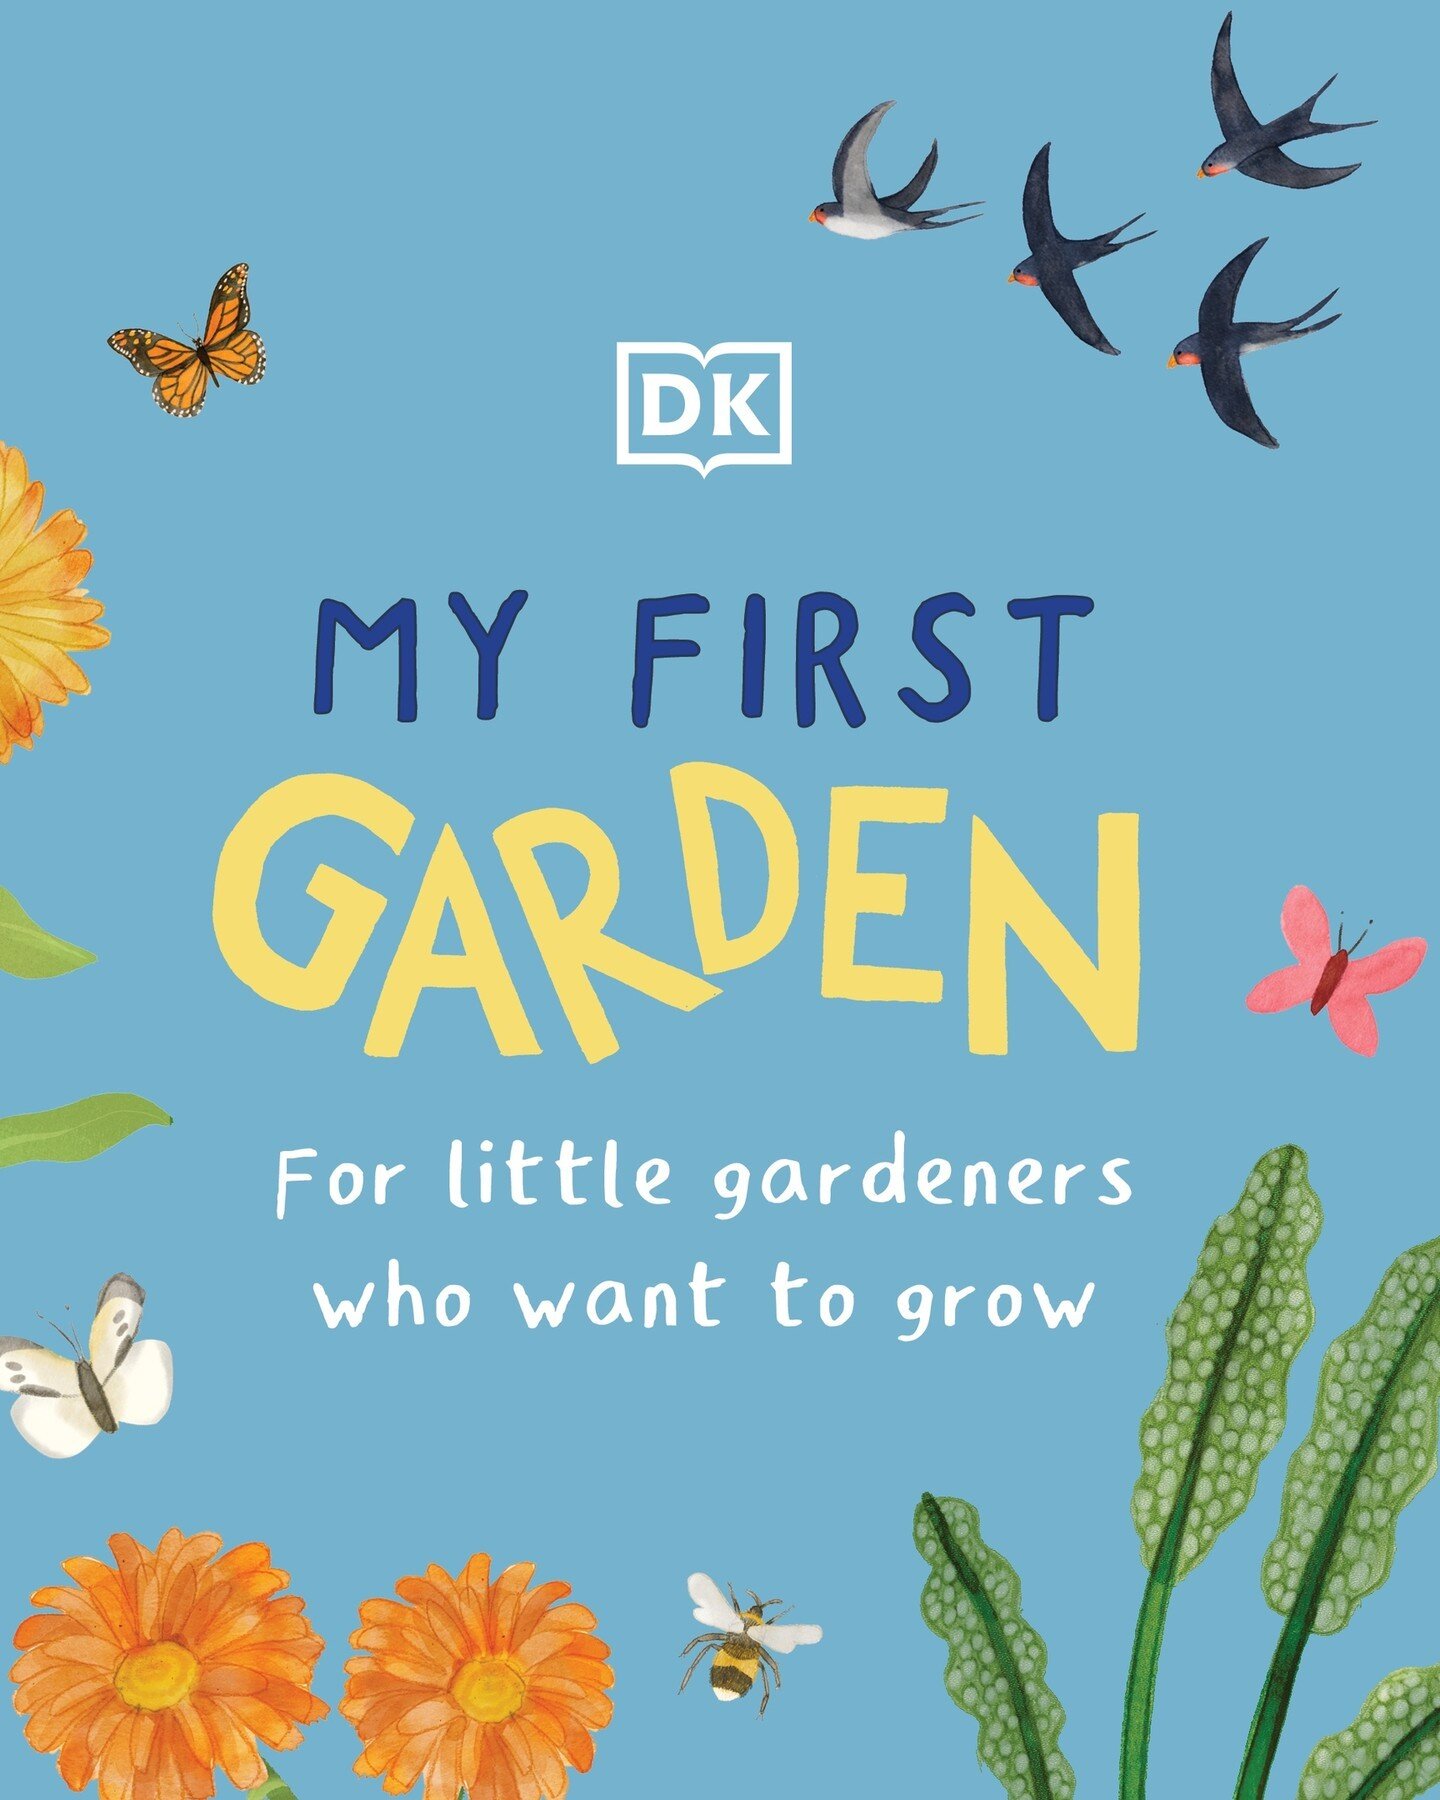 Day 30 of #marchmeetthemaker is NICE WORDS 

I wanted to say thank you for all your lovely words and messages about My First Garden. And thank you to everyone who has bought a copy! You lovely lot 💛💛💛 

#gardeningforkids #dkbooks #childrensbooks #